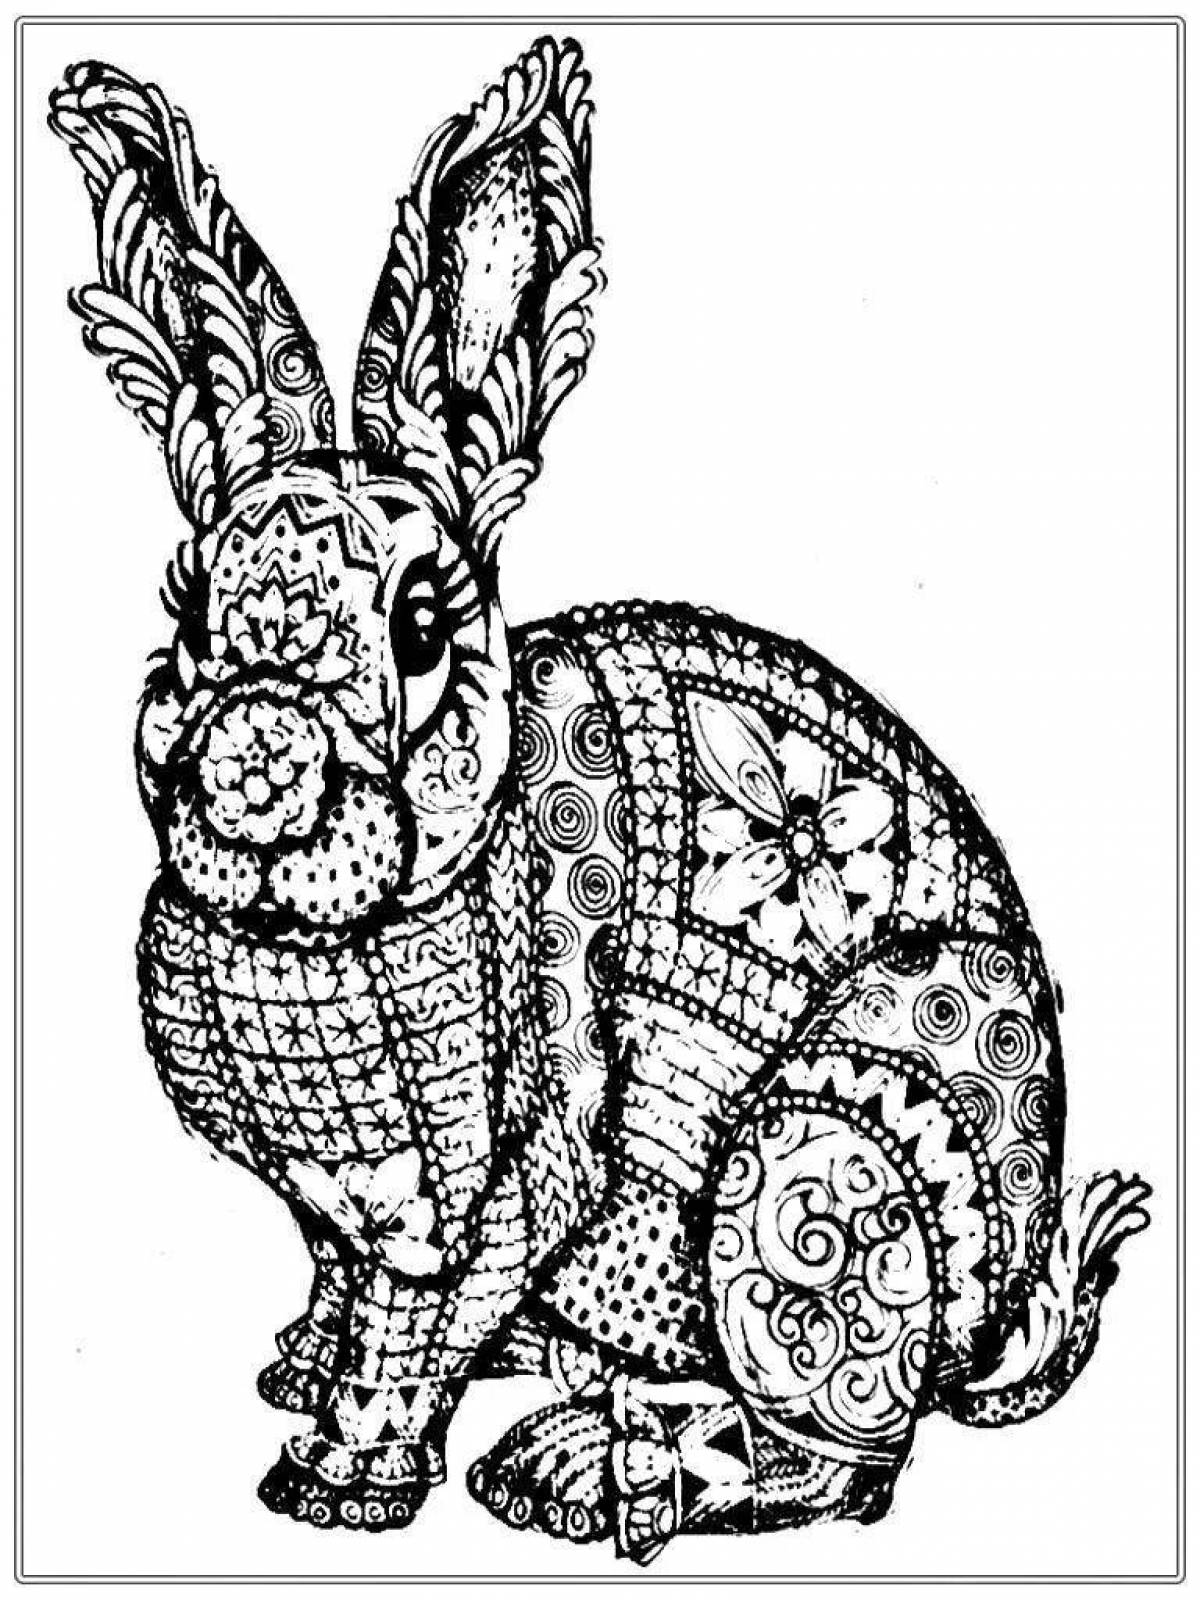 Coloring book glowing anti-stress hare